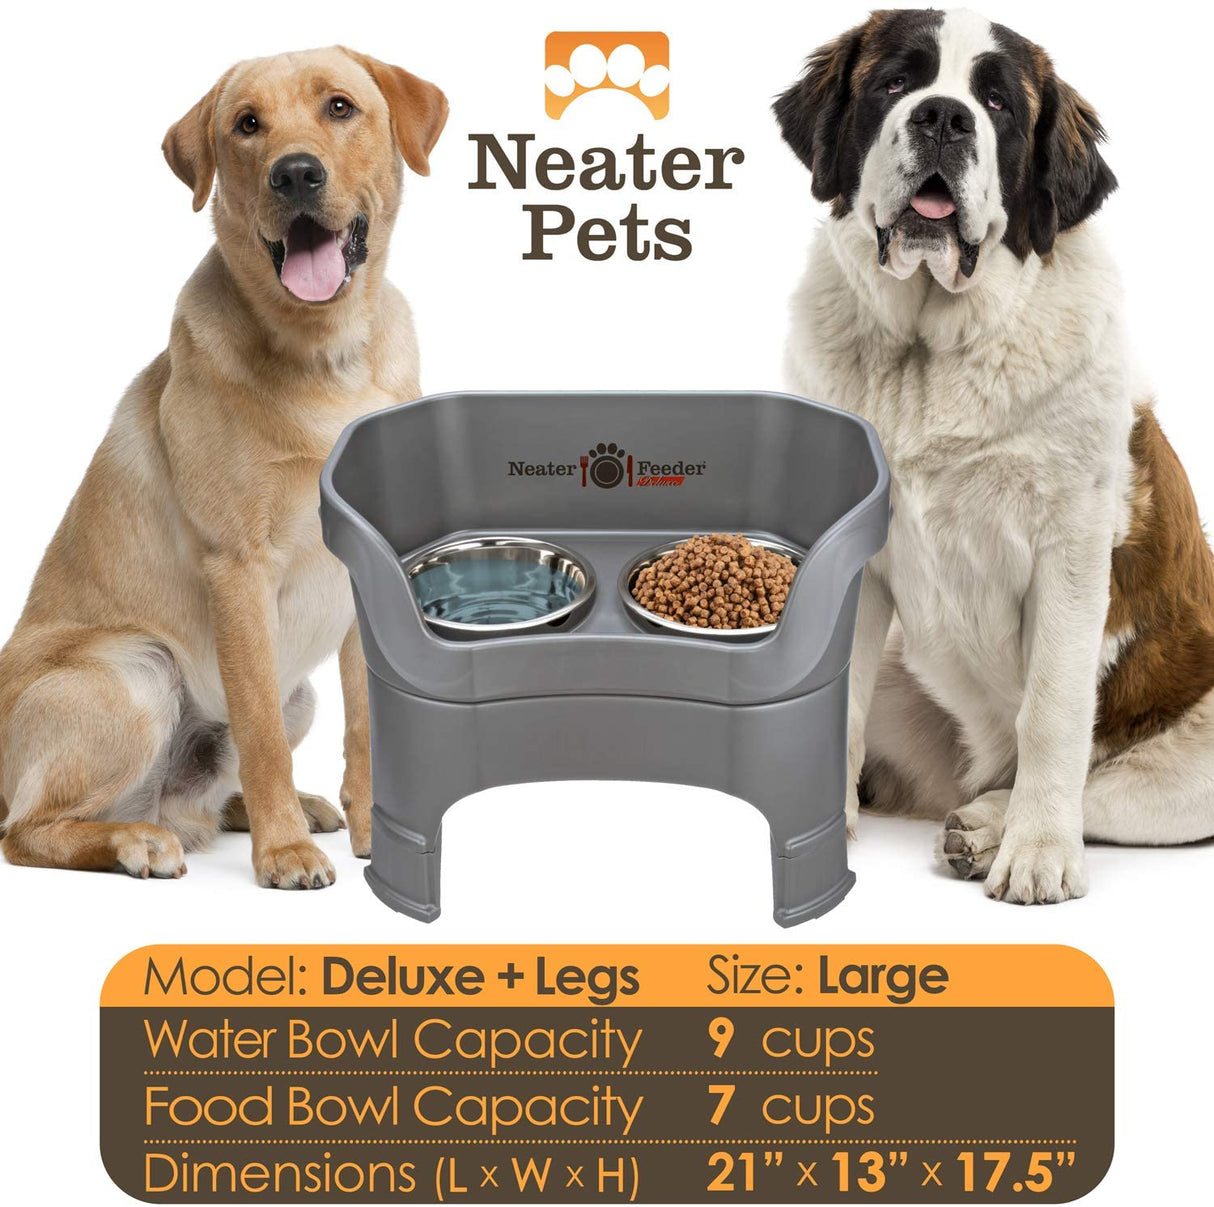 Neater Feeder Deluxe large bowl capacity and dimensions